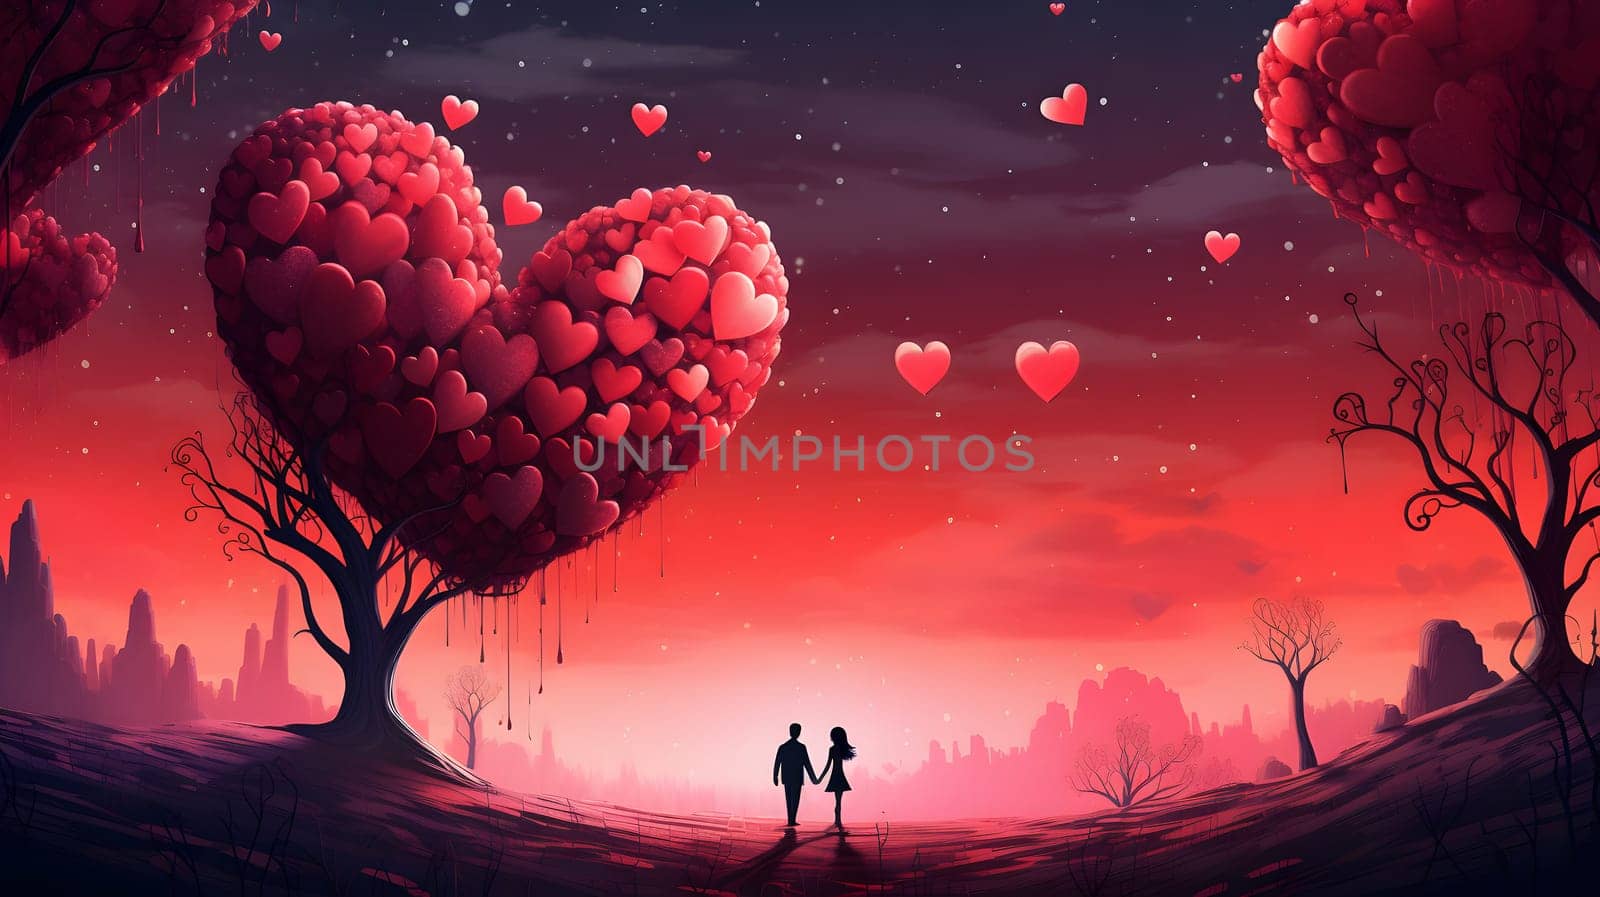 valentines day background - silhouette of couple in love among trees with hearts as leaves, neural network generated image by z1b